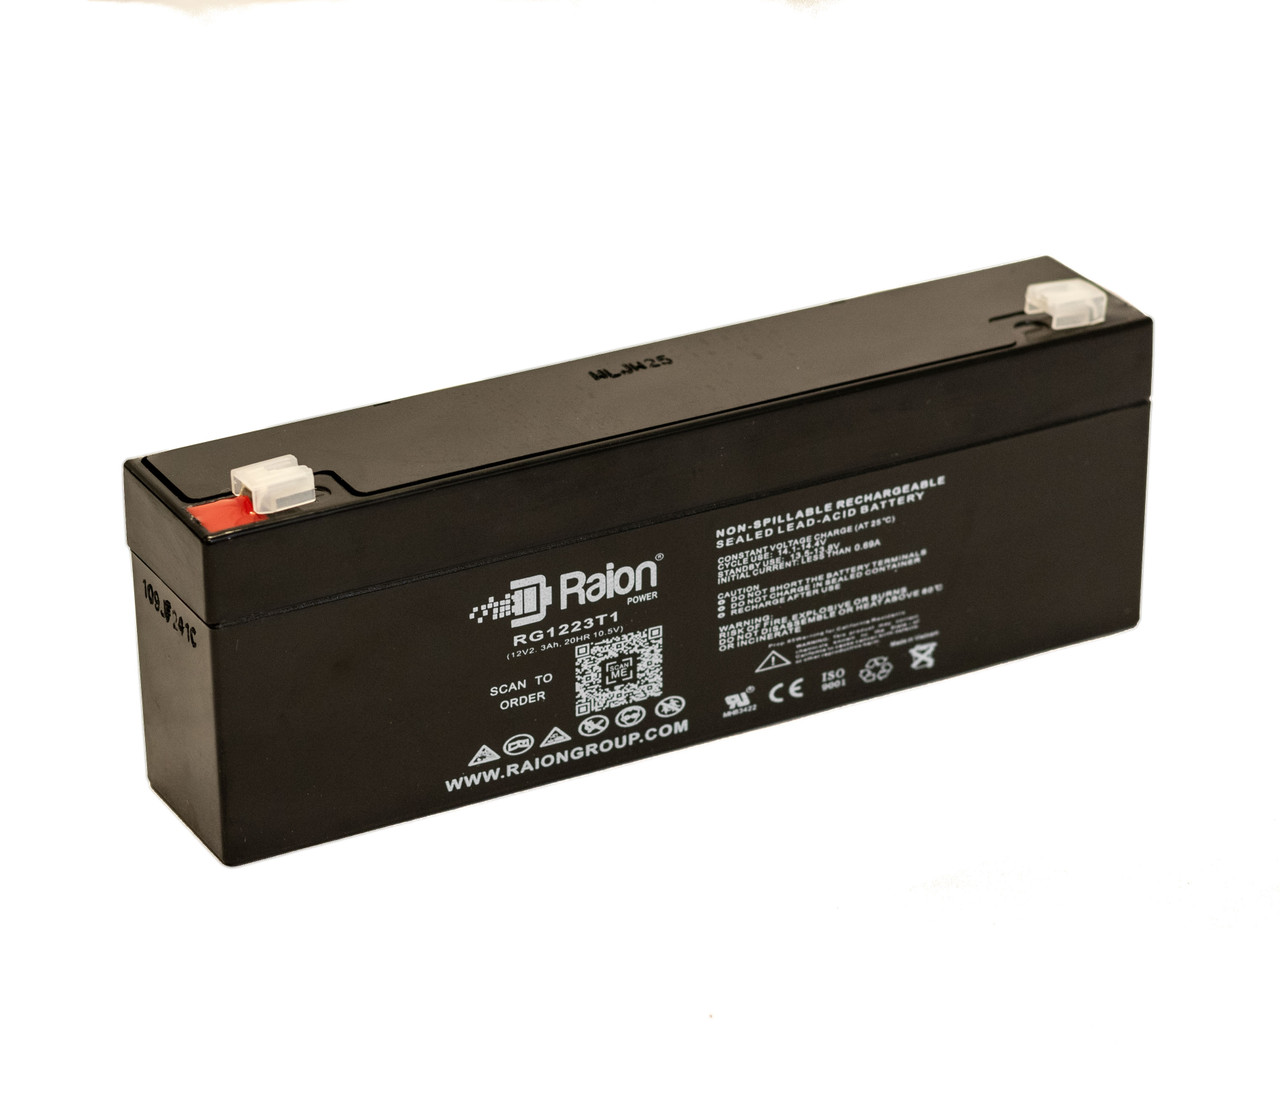 Raion Power RG1223T1 Replacement Battery for Interactive Technologies Inc Caretaker